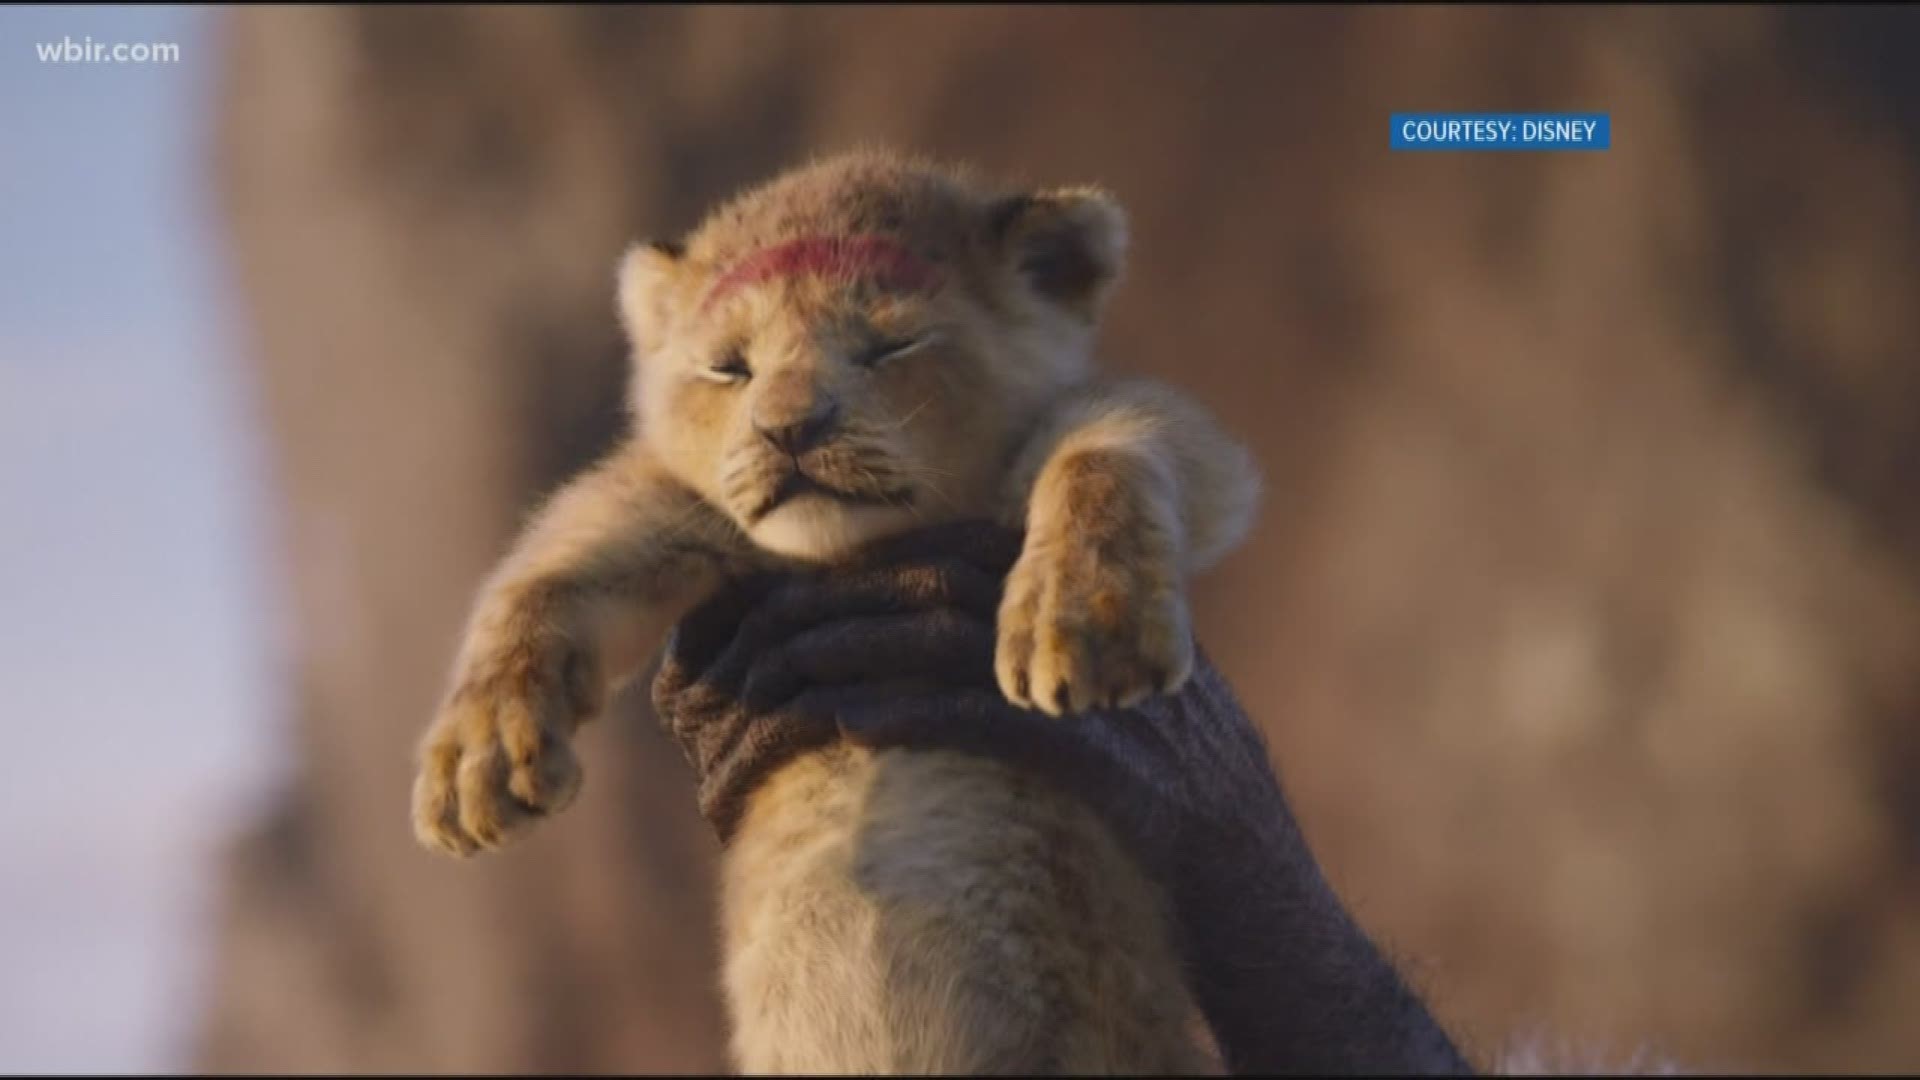 The circle of life starts again with the new live action Lion King hitting theaters this weekend. The film is projected to make at least $175 million in its opening weekend in the United States alone.